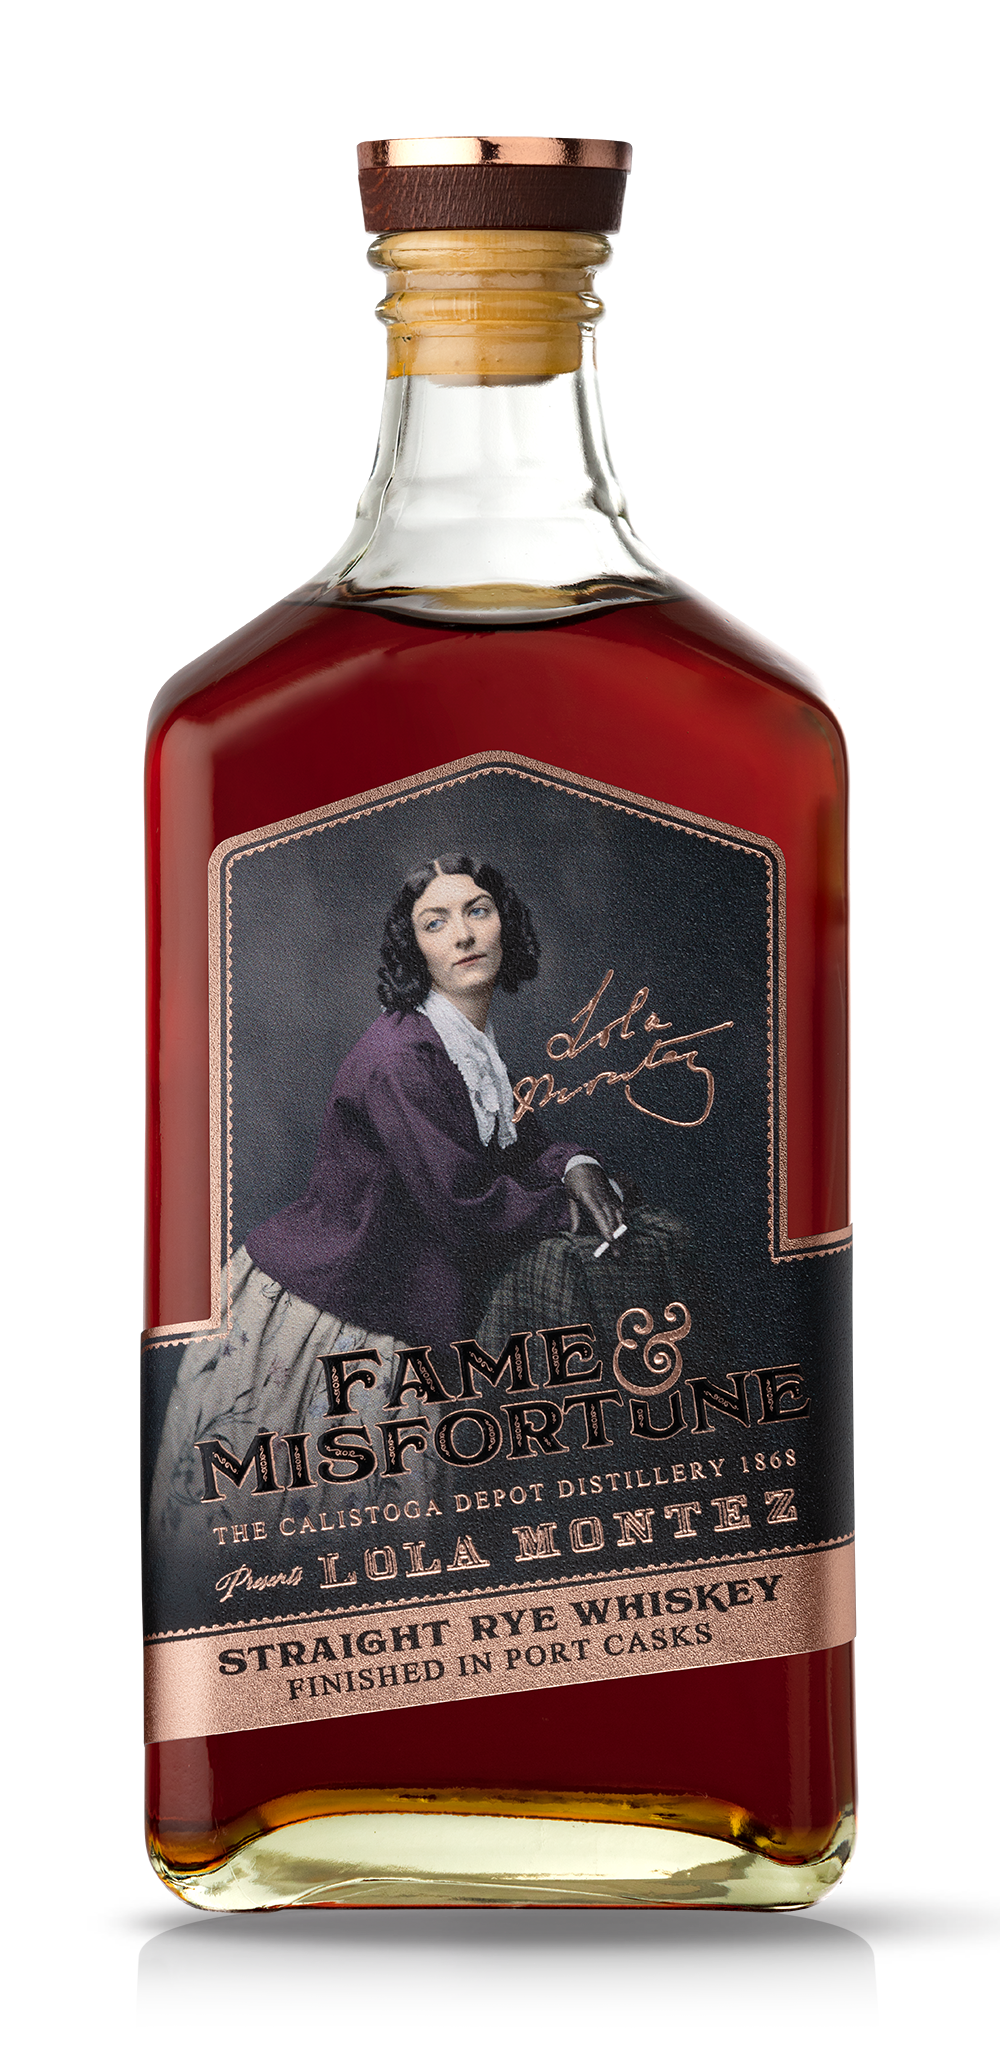 Fame & Misfortune Straight Rye Whiskey Finished in Port Casks by the Calistoga Depot Spirits